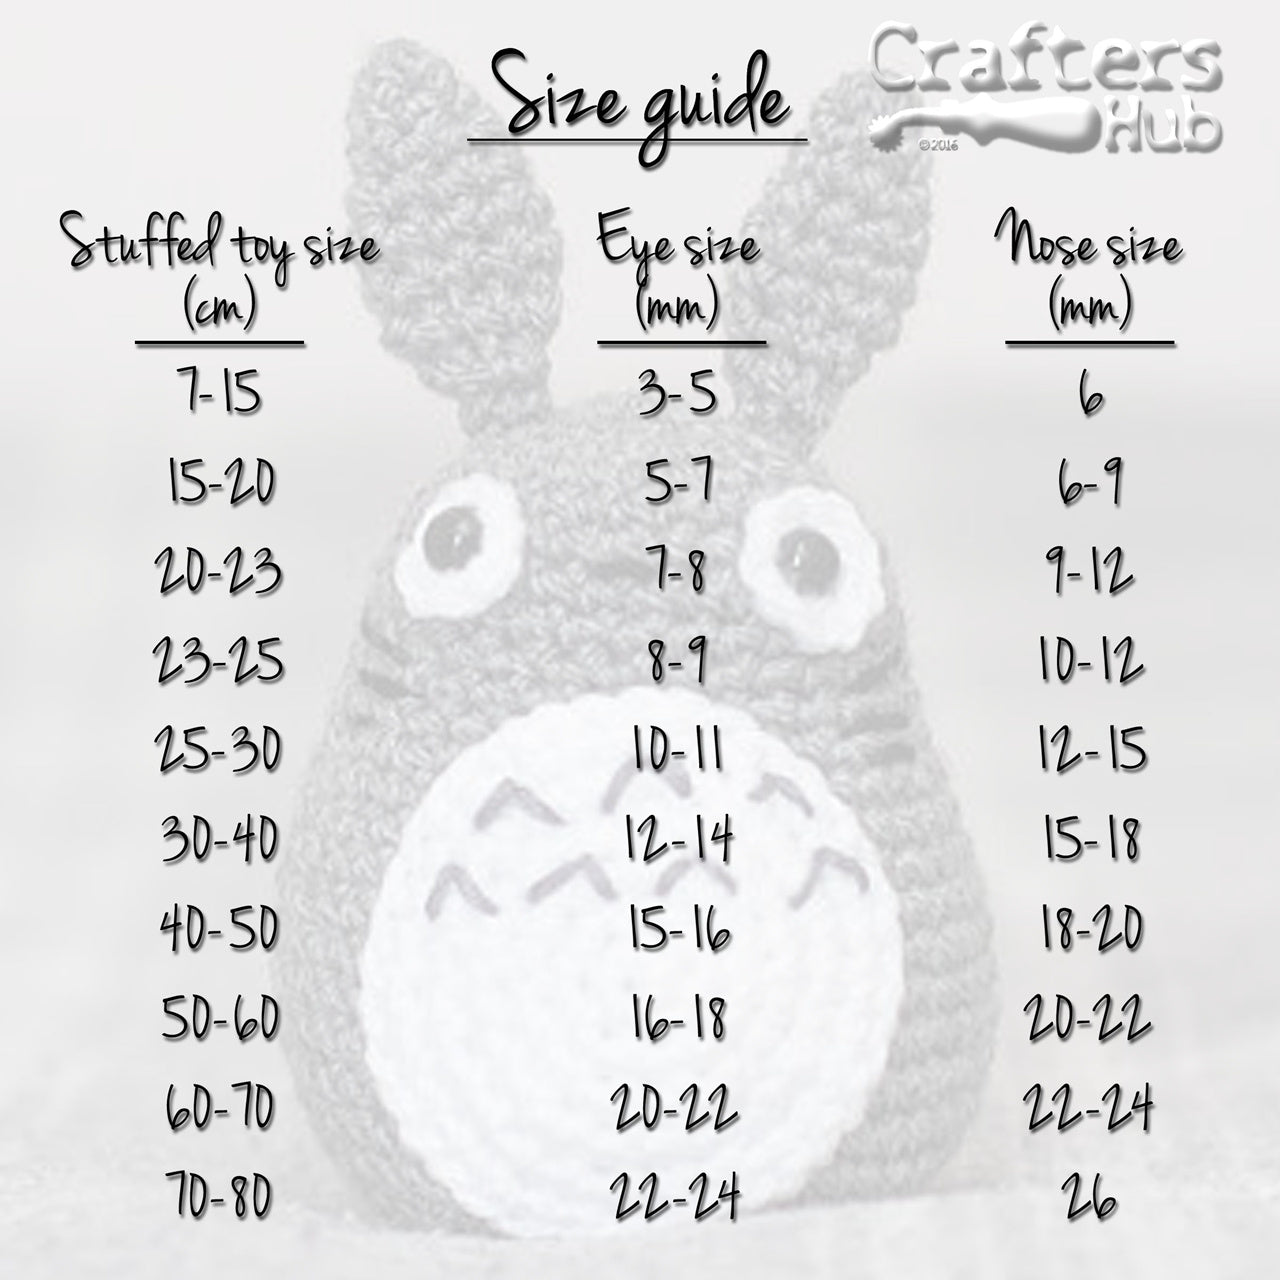 Crafters Hub Round Safety Eyes (5 pairs)